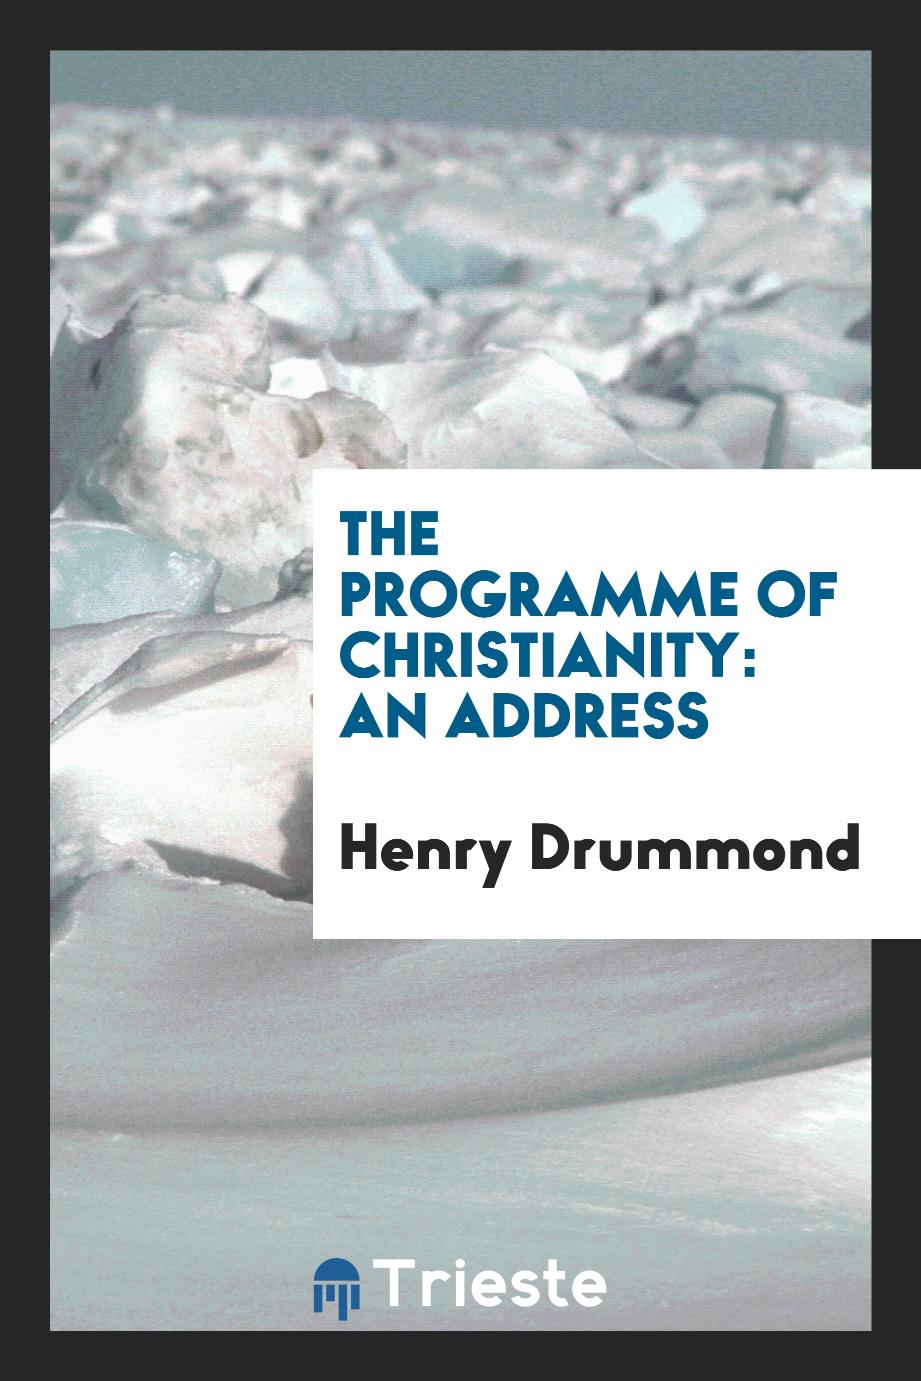 The Programme of Christianity: An Address